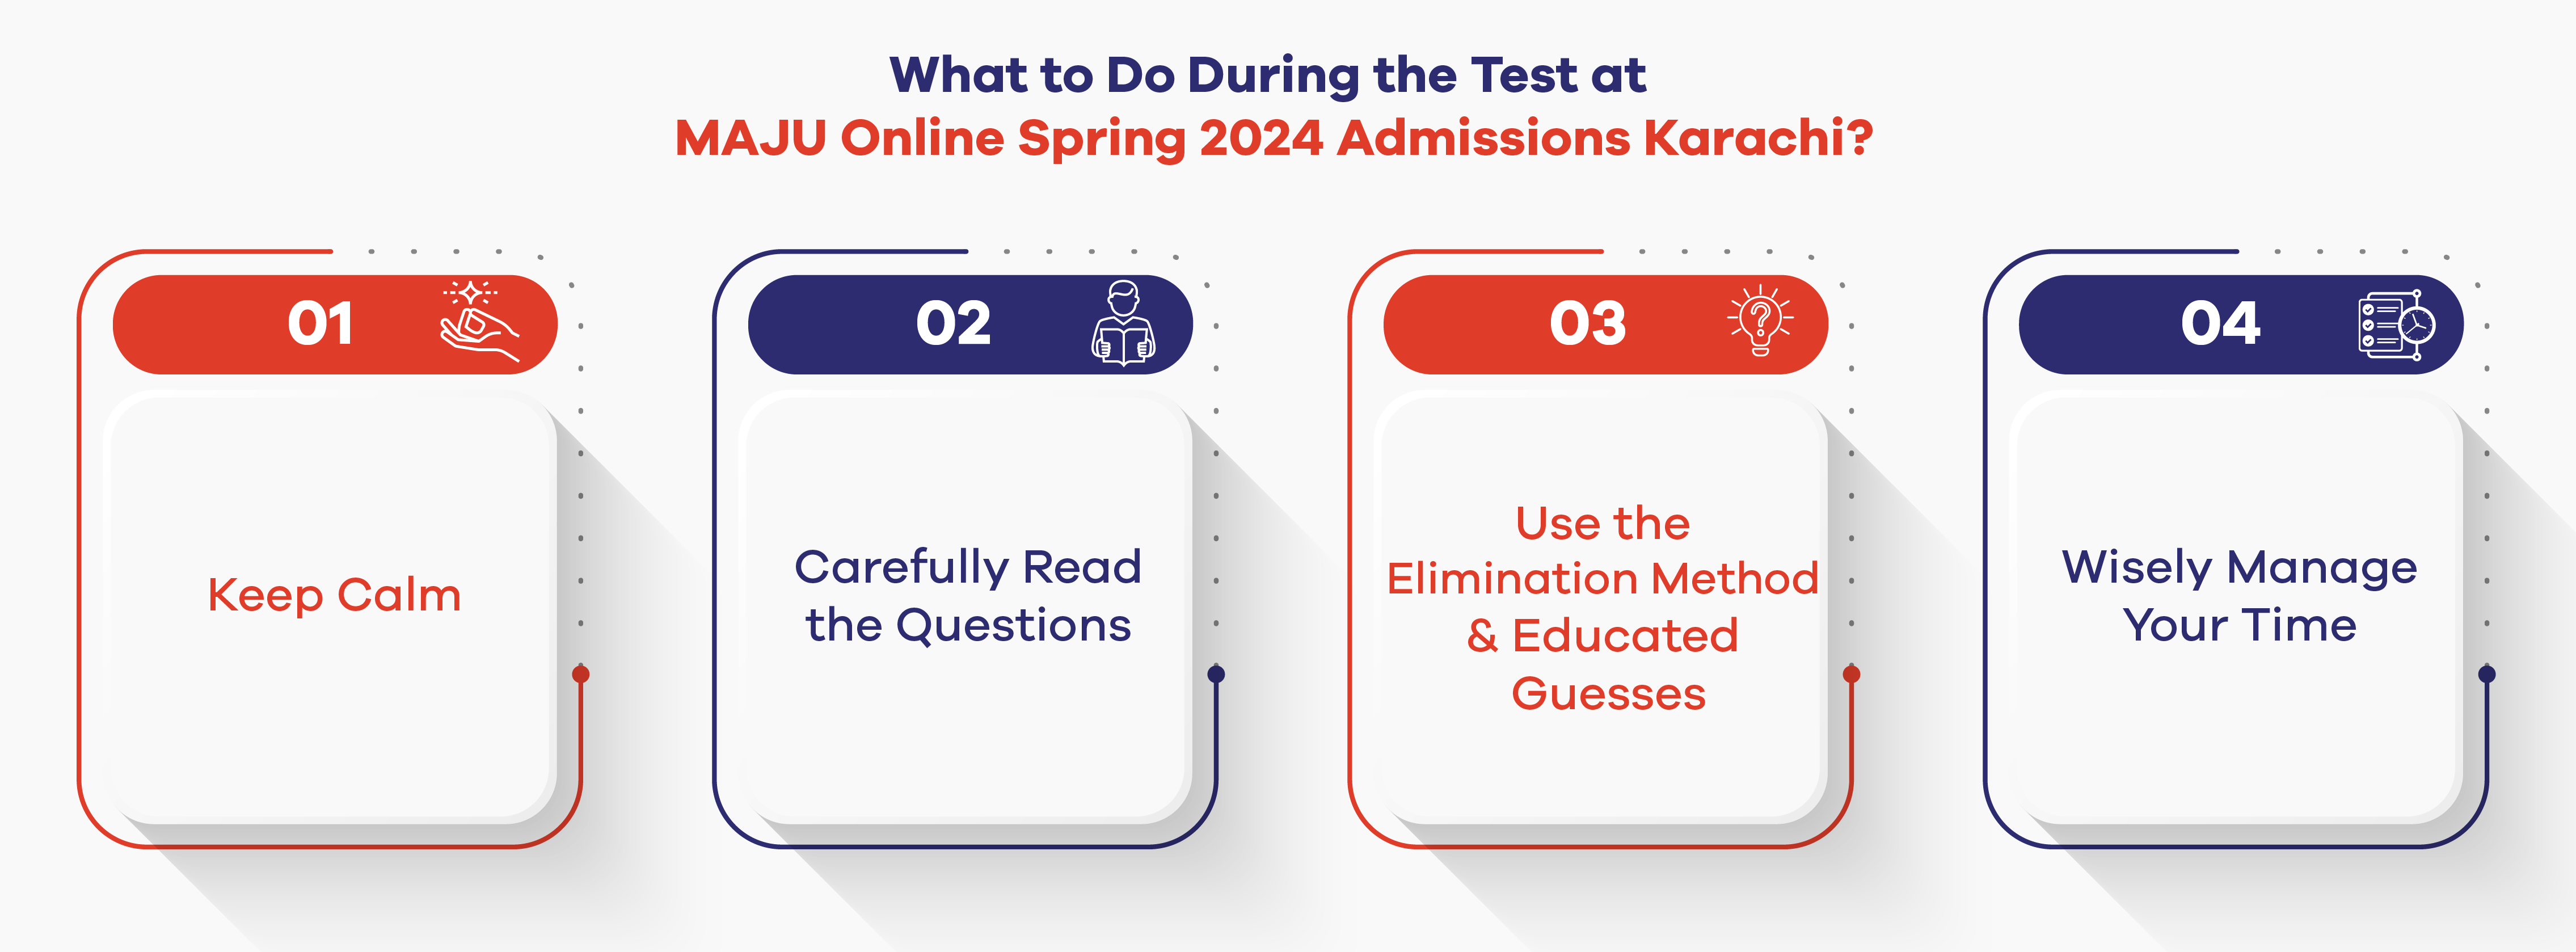 What to Do During the Test at MAJU Online Spring 2024 Admissions Karachi? 